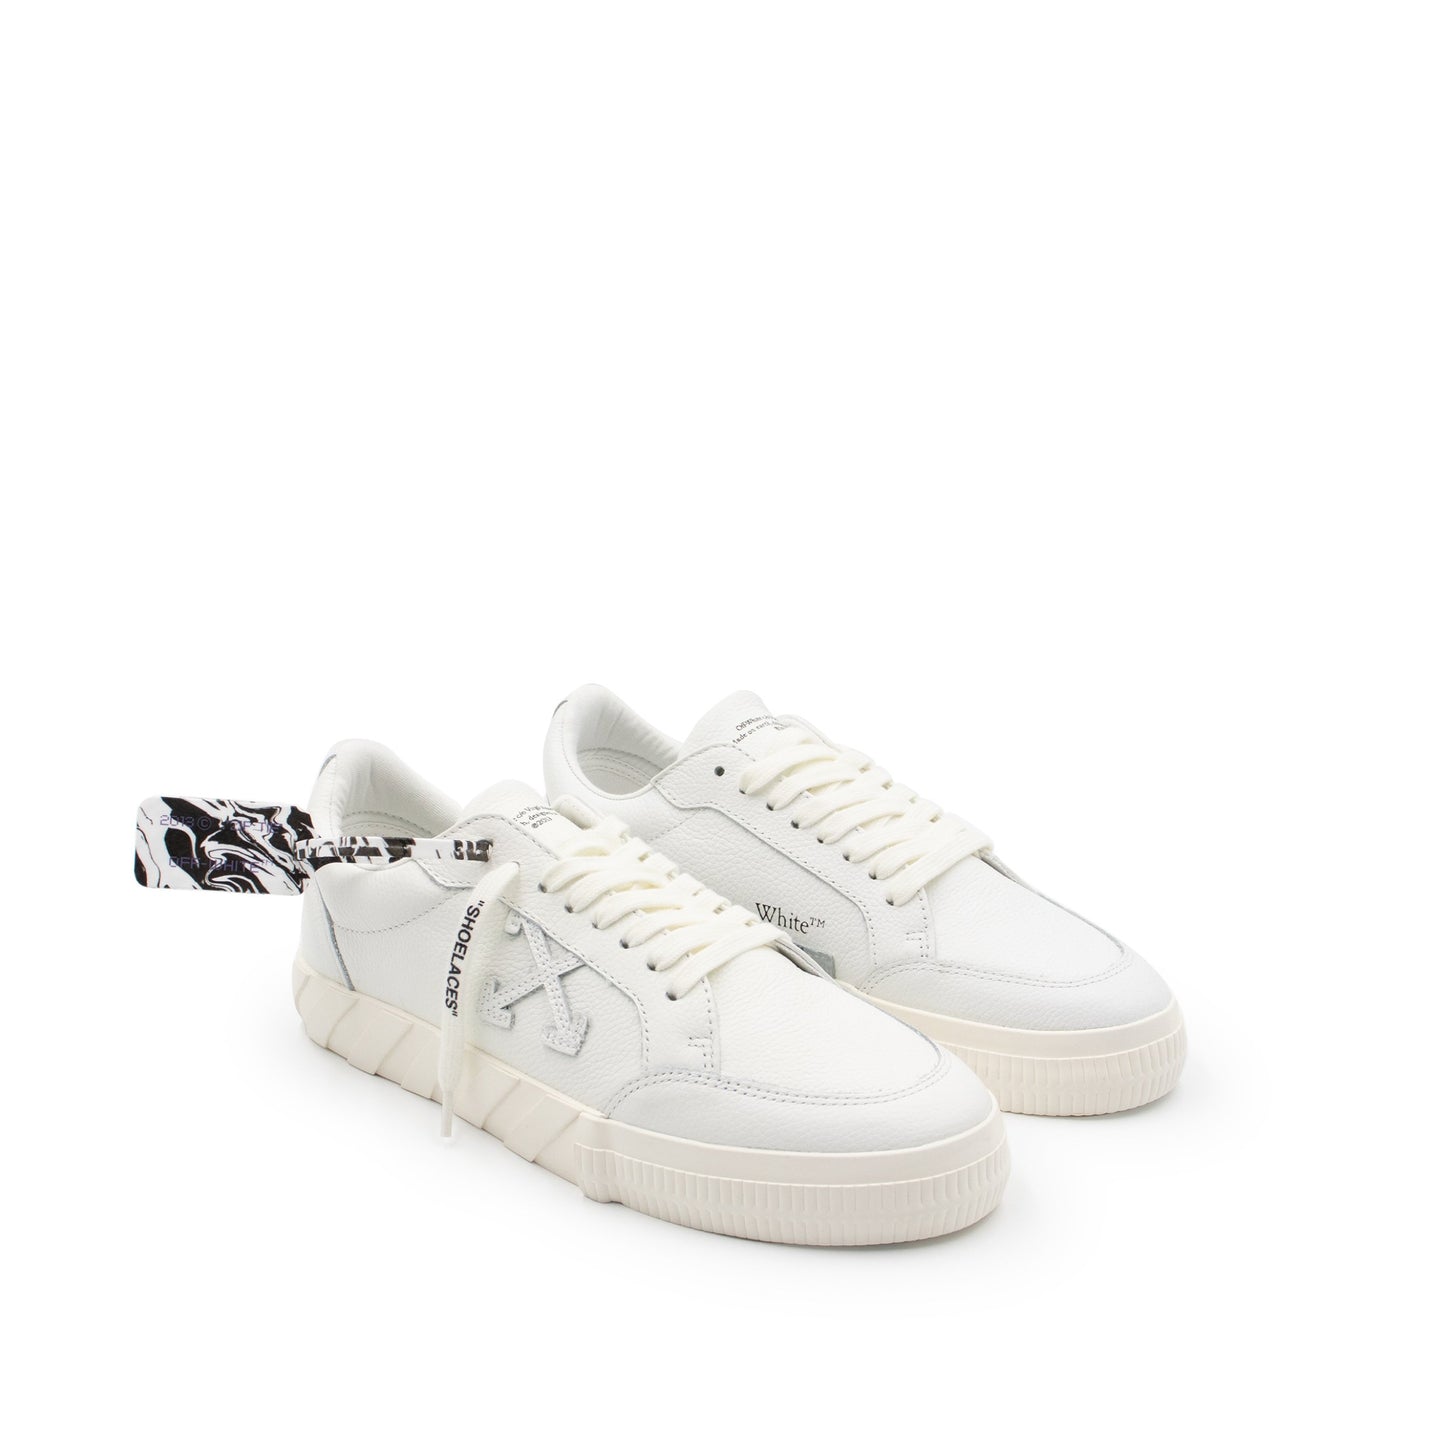 Low Vulcanized Calf Leather Sneaker in White/White